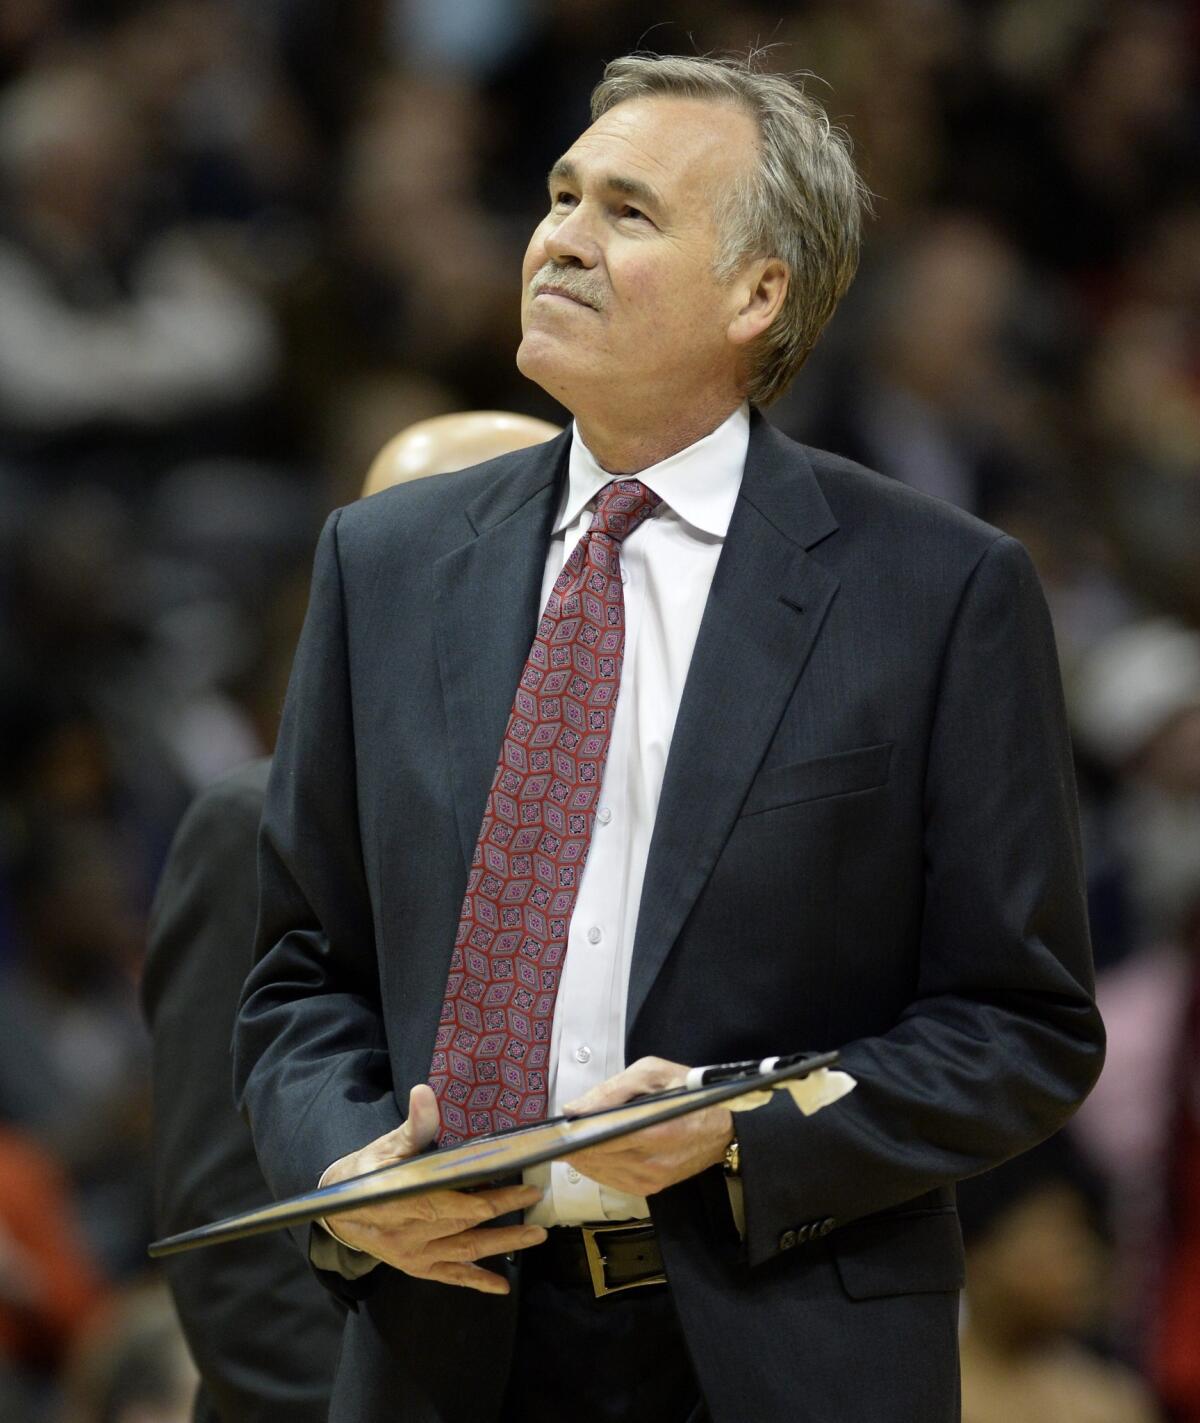 Lakers Coach Mike D'Antoni hopes some of his players can catch a break and get healthy as the team prepares for a tough stretch of games.